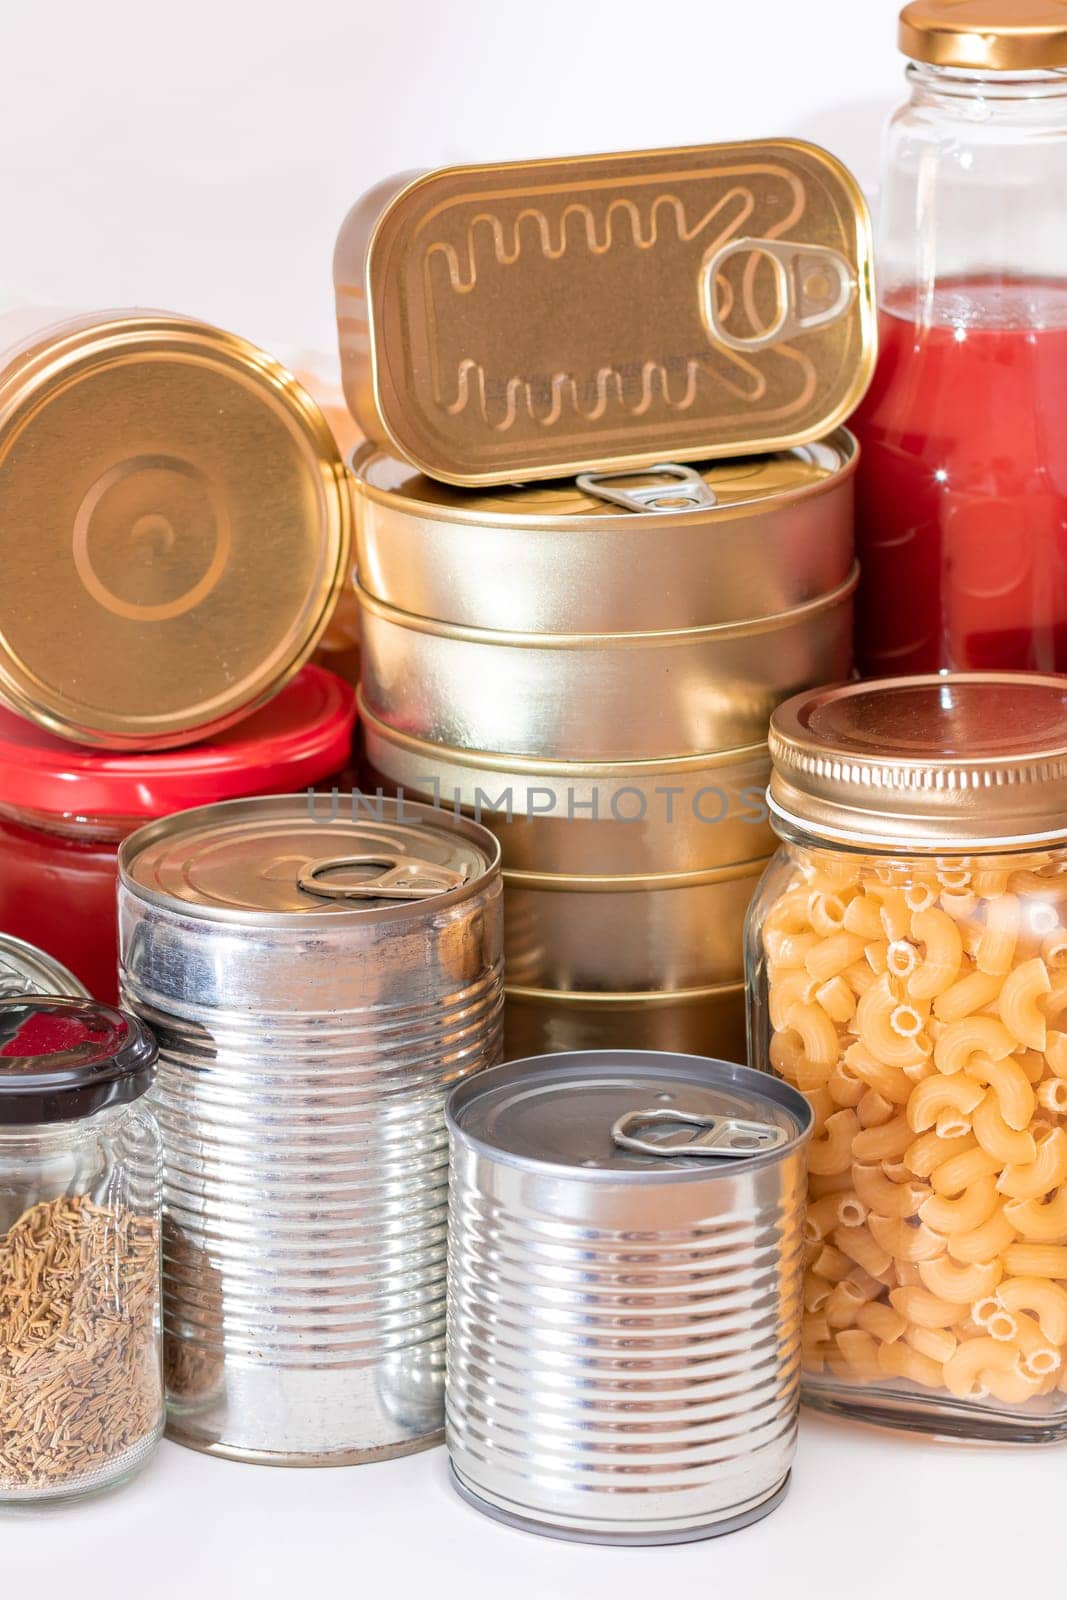 Food Reserves: Canned Food, Spaghetti, Pate, Tuna, Tomato Juice, Pasta, Fish and Grocery. Emergency Food Storage in Case of Crisis. Strategic Food Supplies